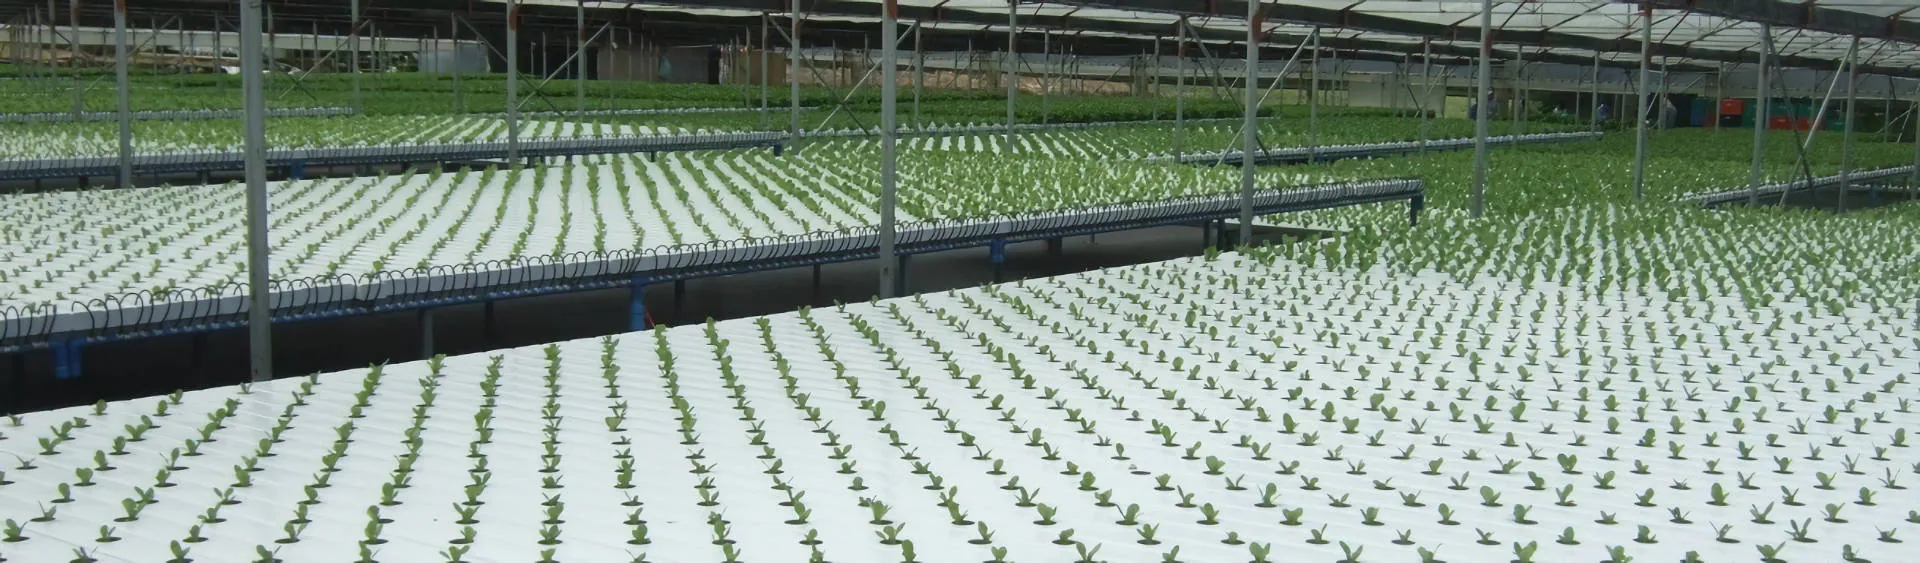 Young plants in a large hydroponic trough farm